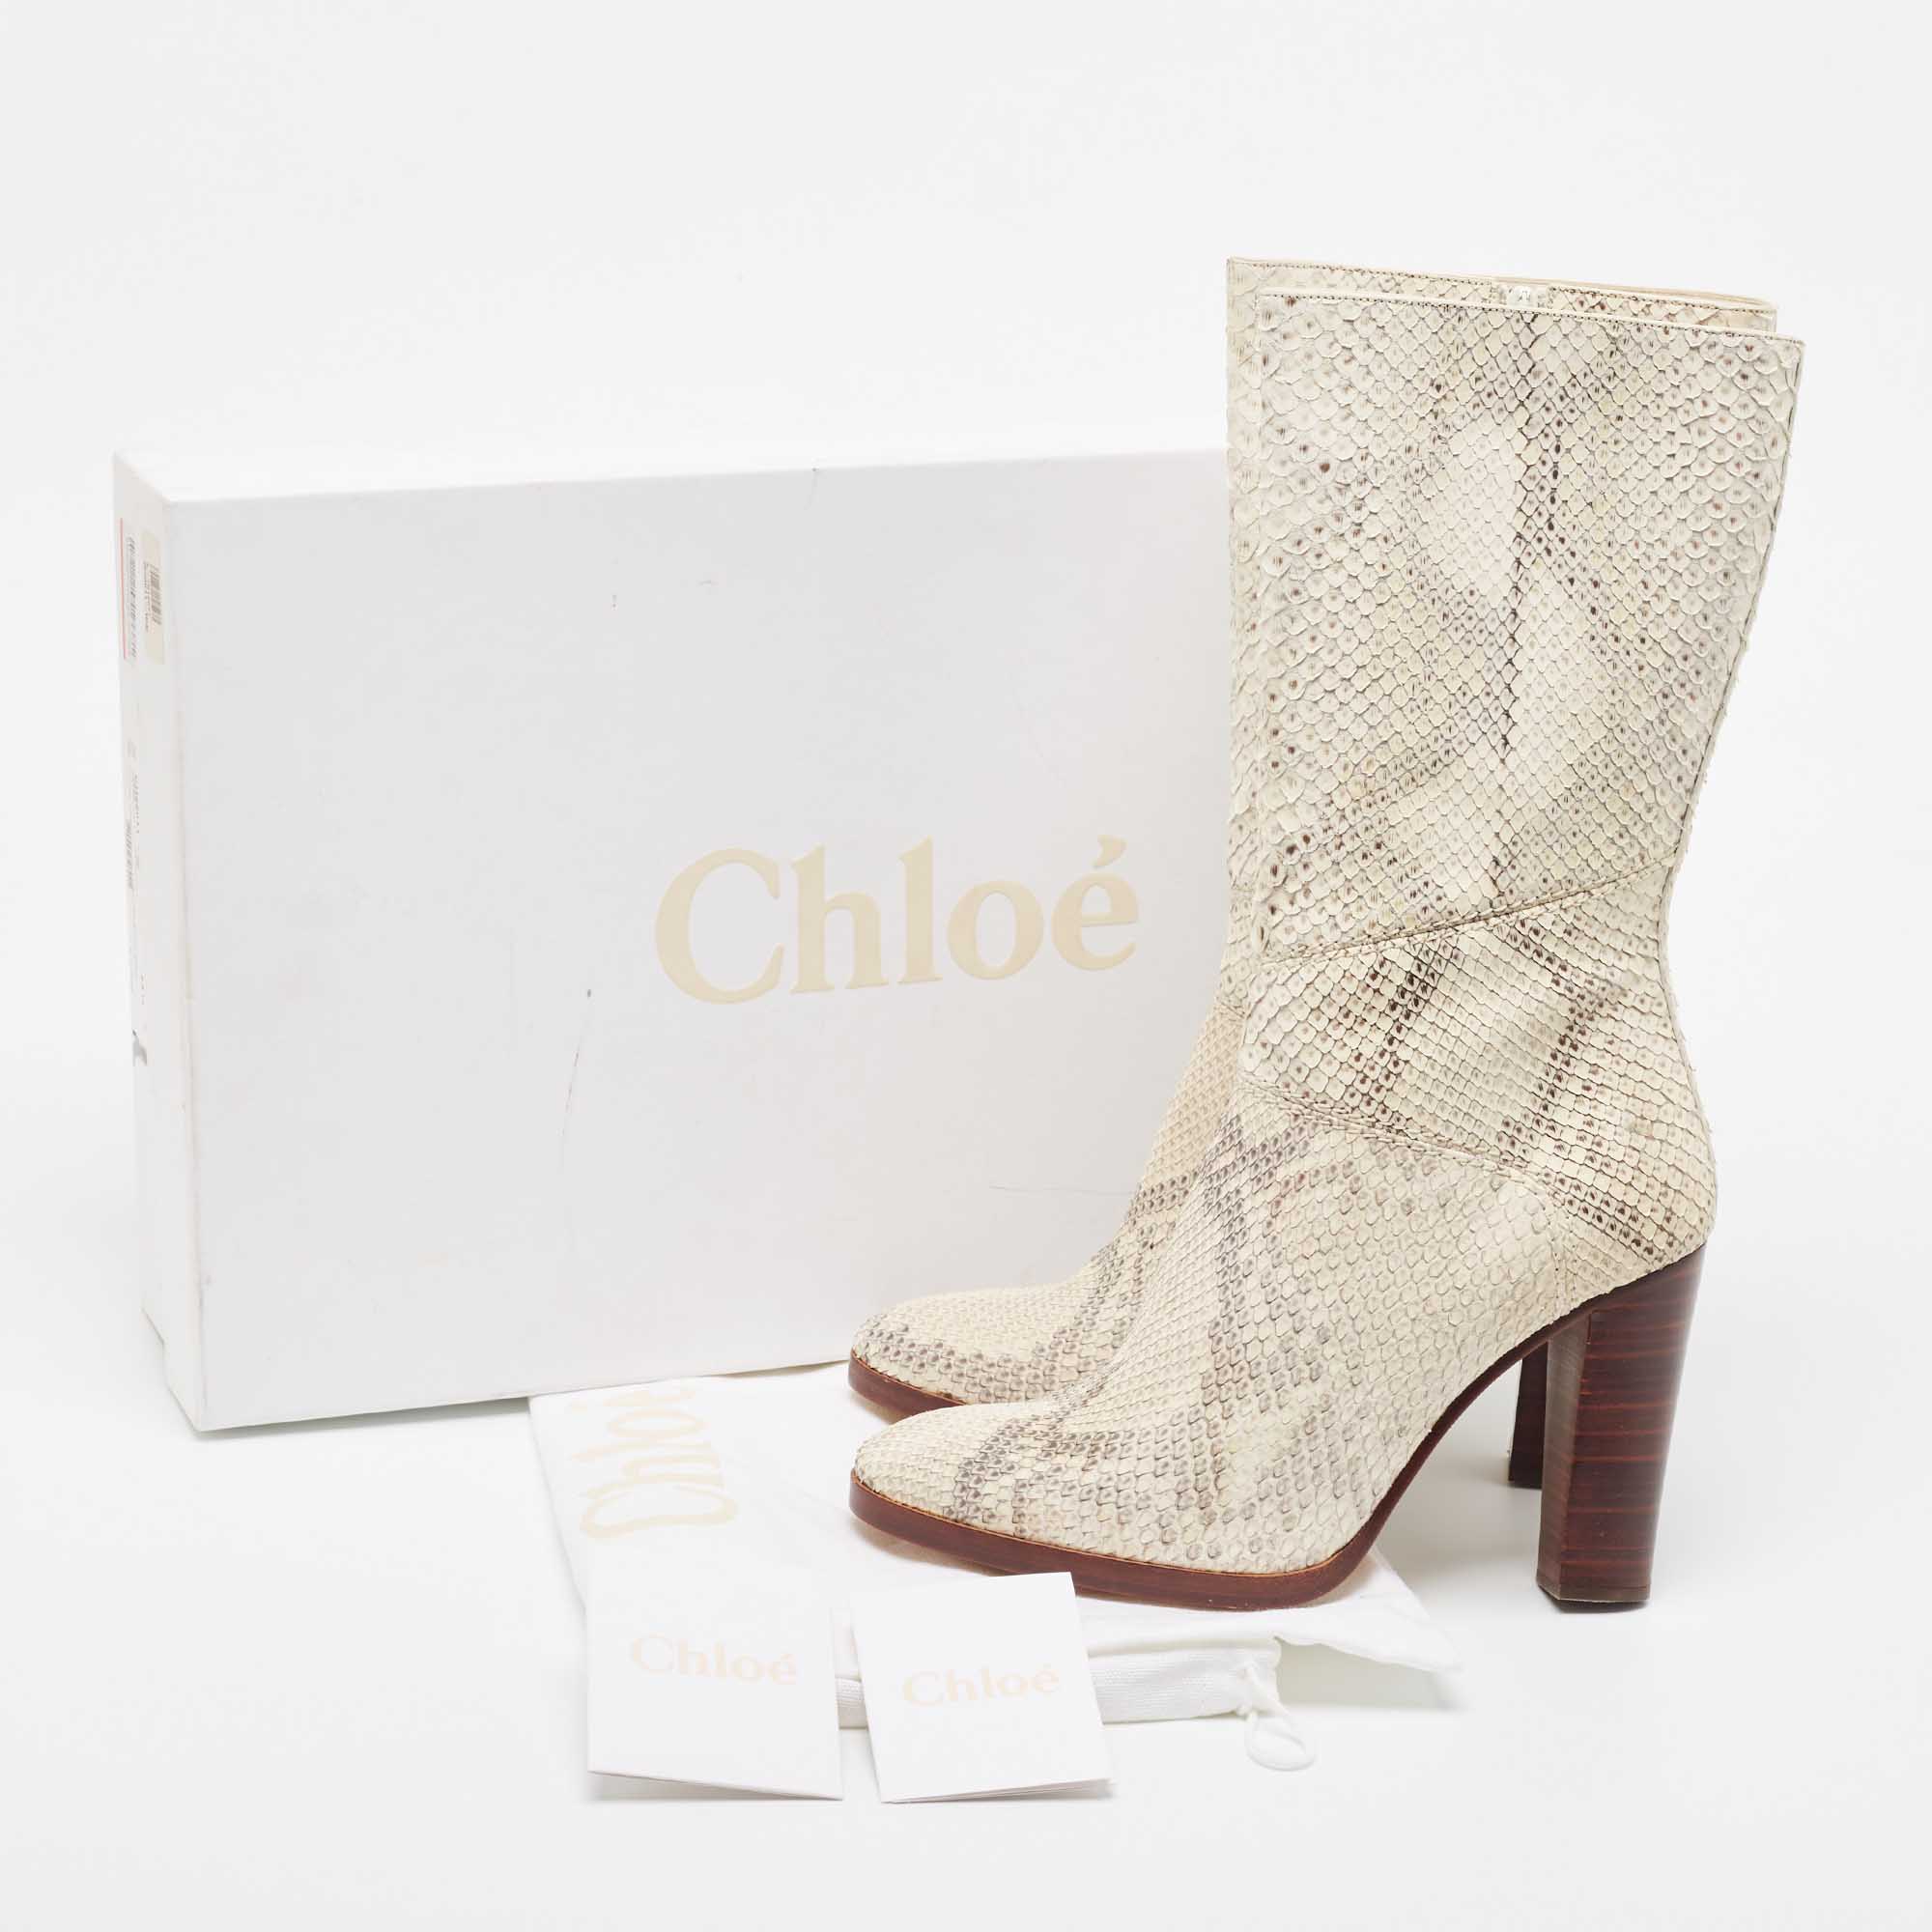 Chloé Two Tone Python Leather Adelie Mid Calf Boots Size 41.5